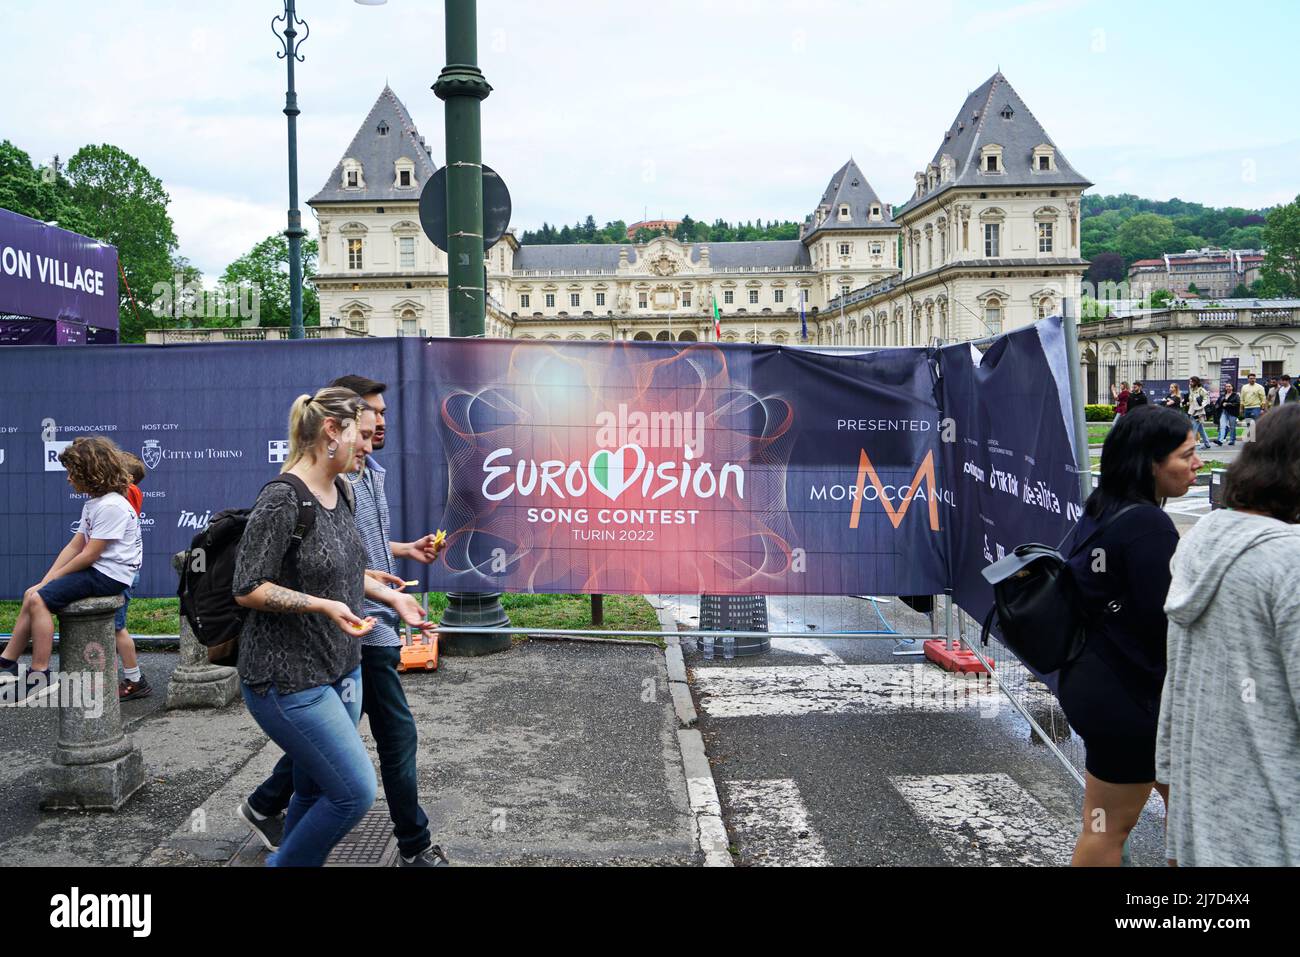 The EuroVision Song Contest  2022 in Turin, Italy.  TURIN, ITALY - MAY 2022 Stock Photo